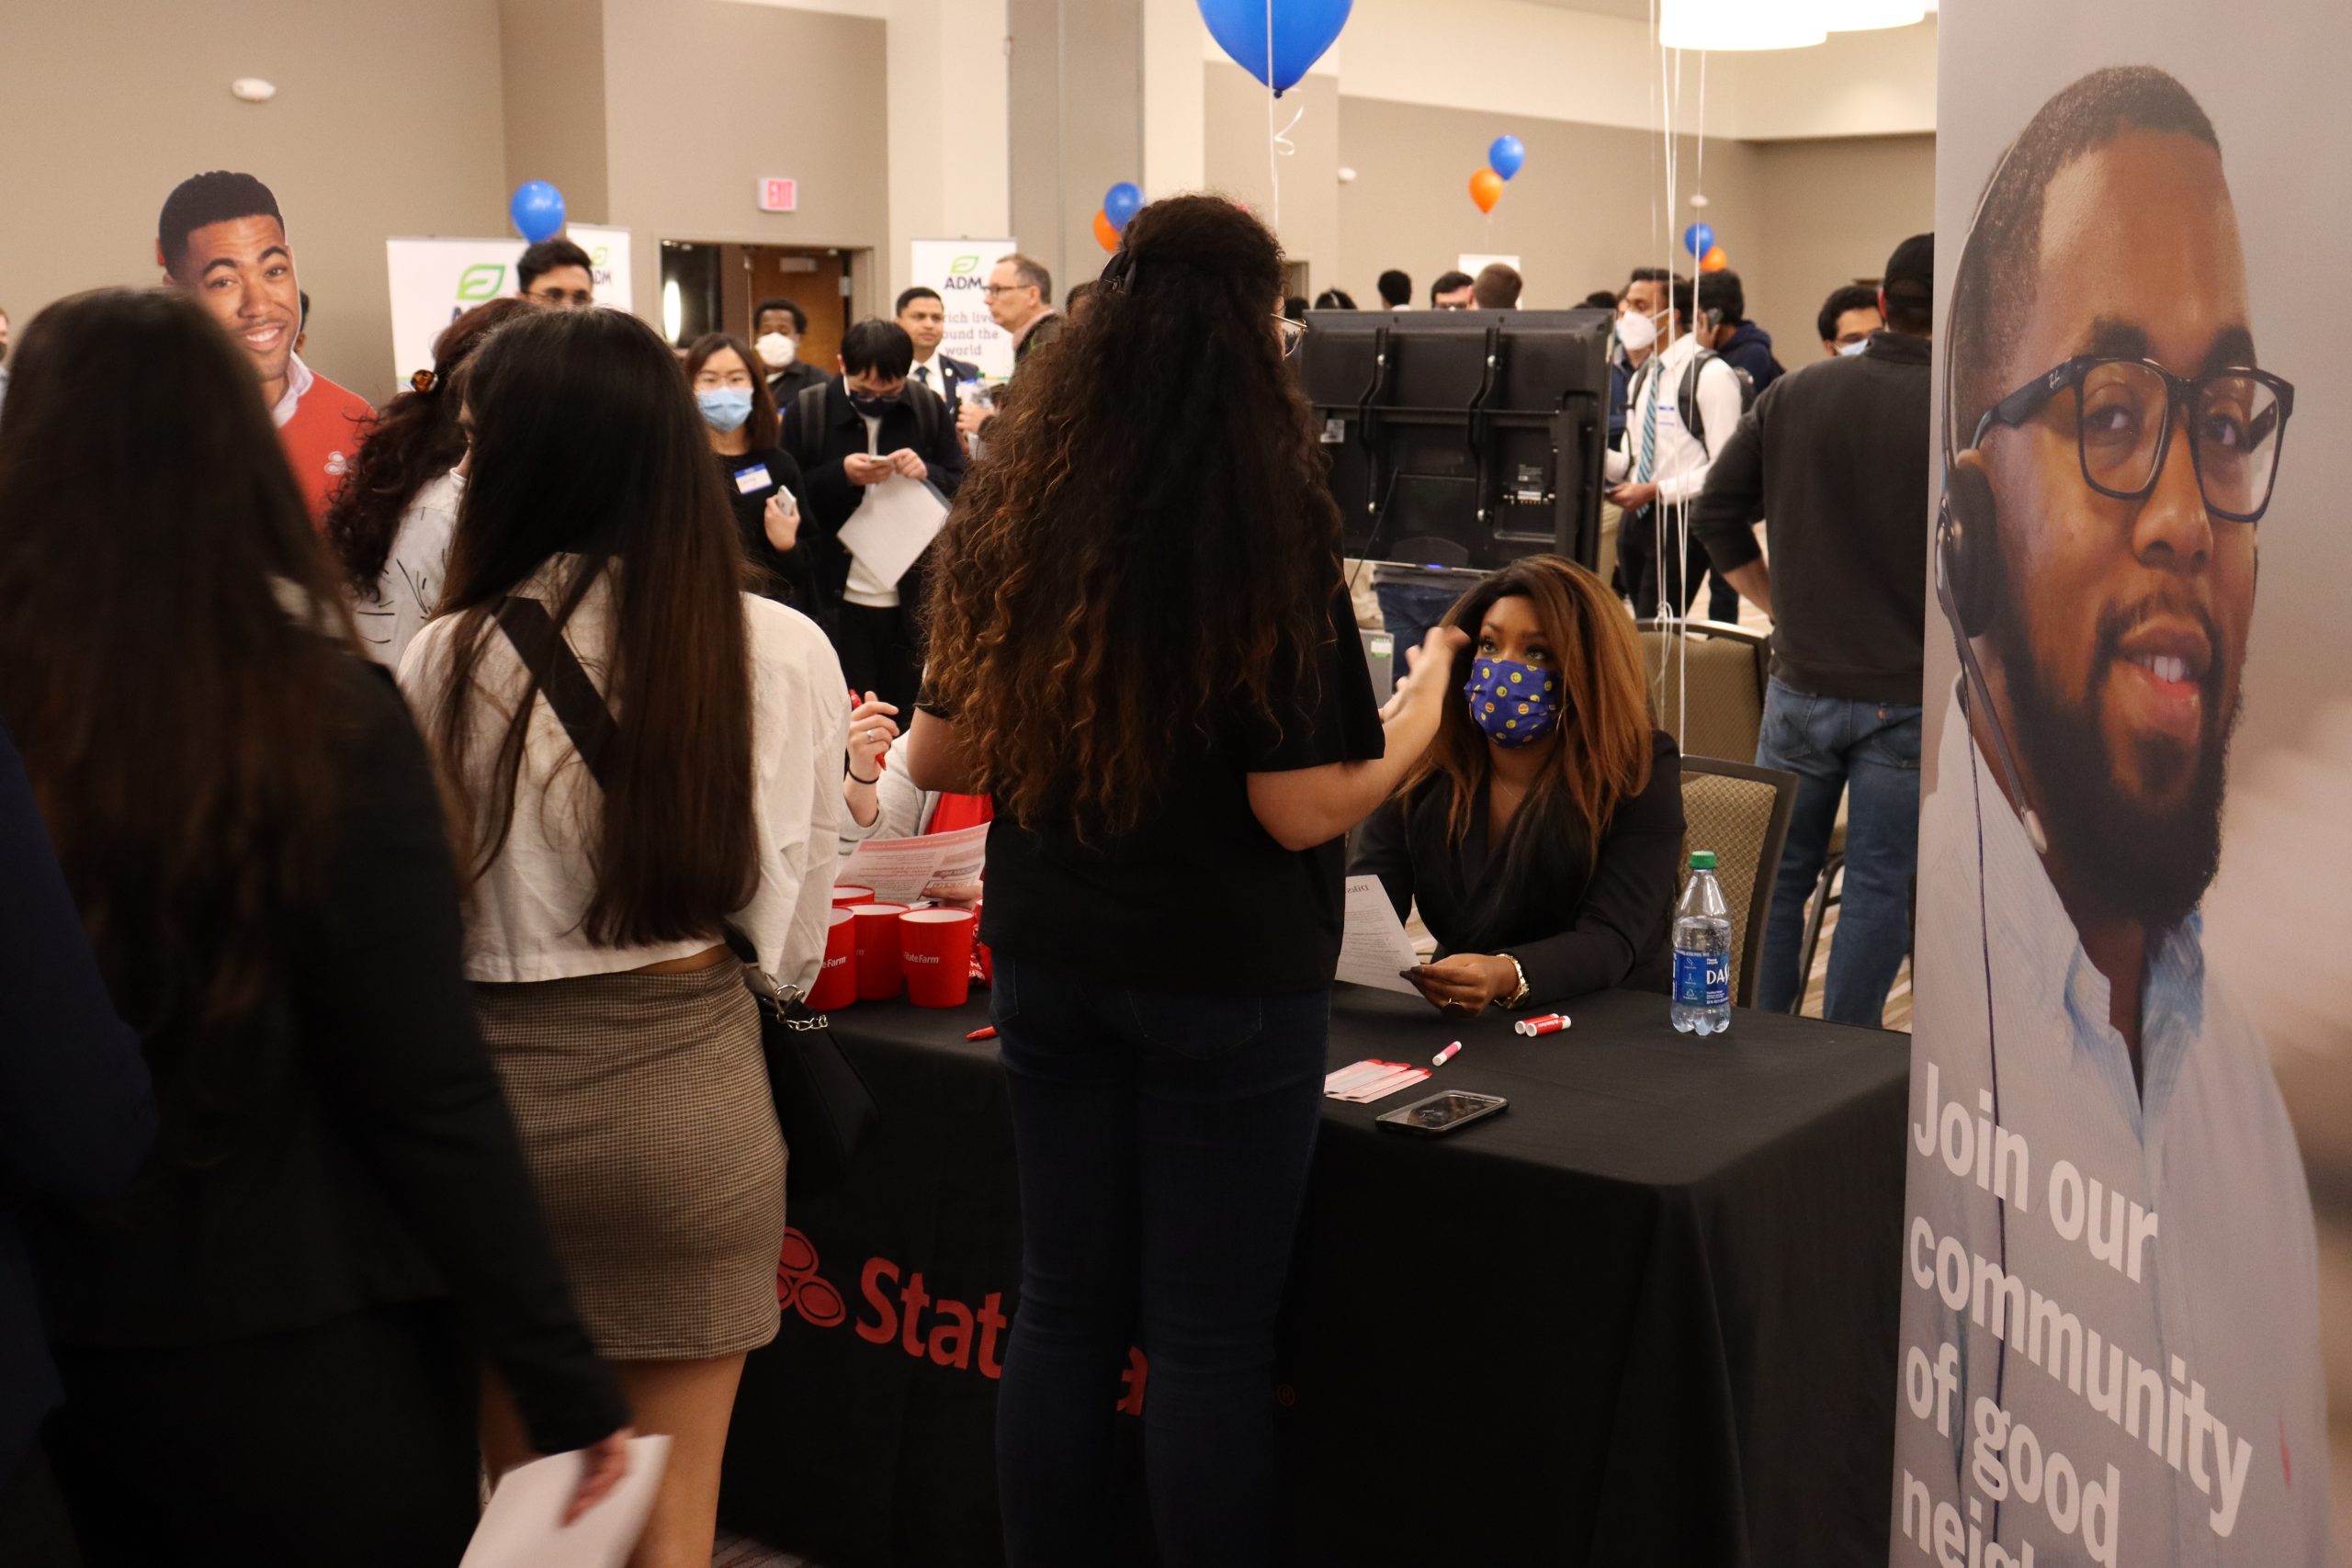 State Farm booth at the Research Park Career Fair.